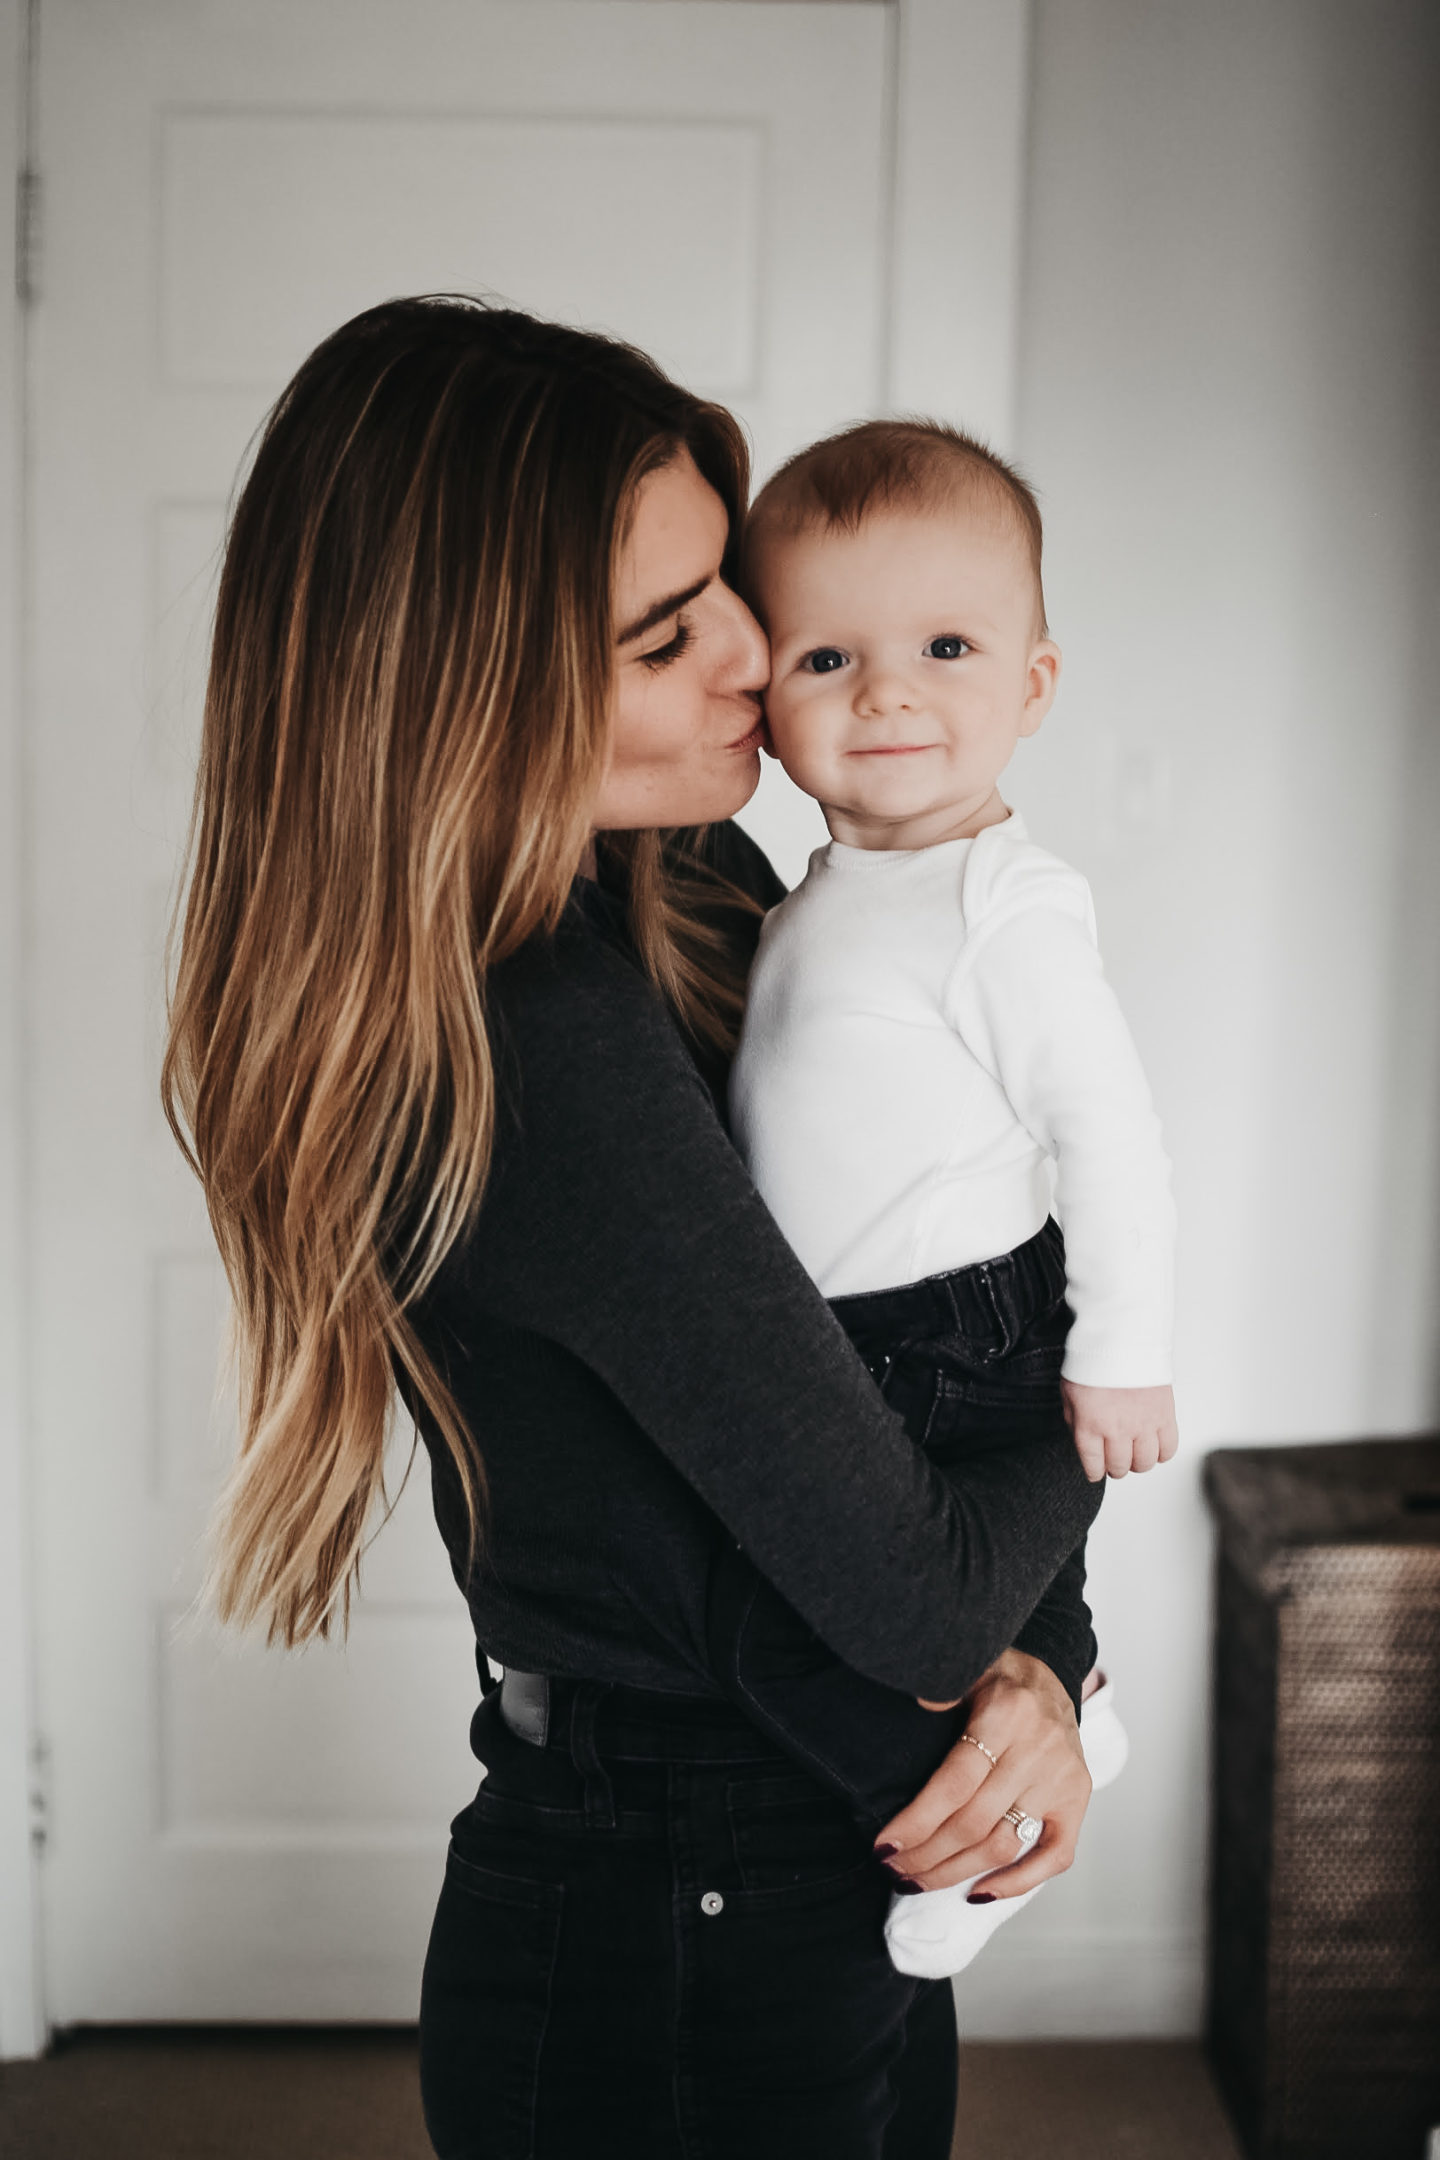 The Grey Edit - Seattle Lifestyle Blogger and Mother - 7 Month Old - Boden Grey